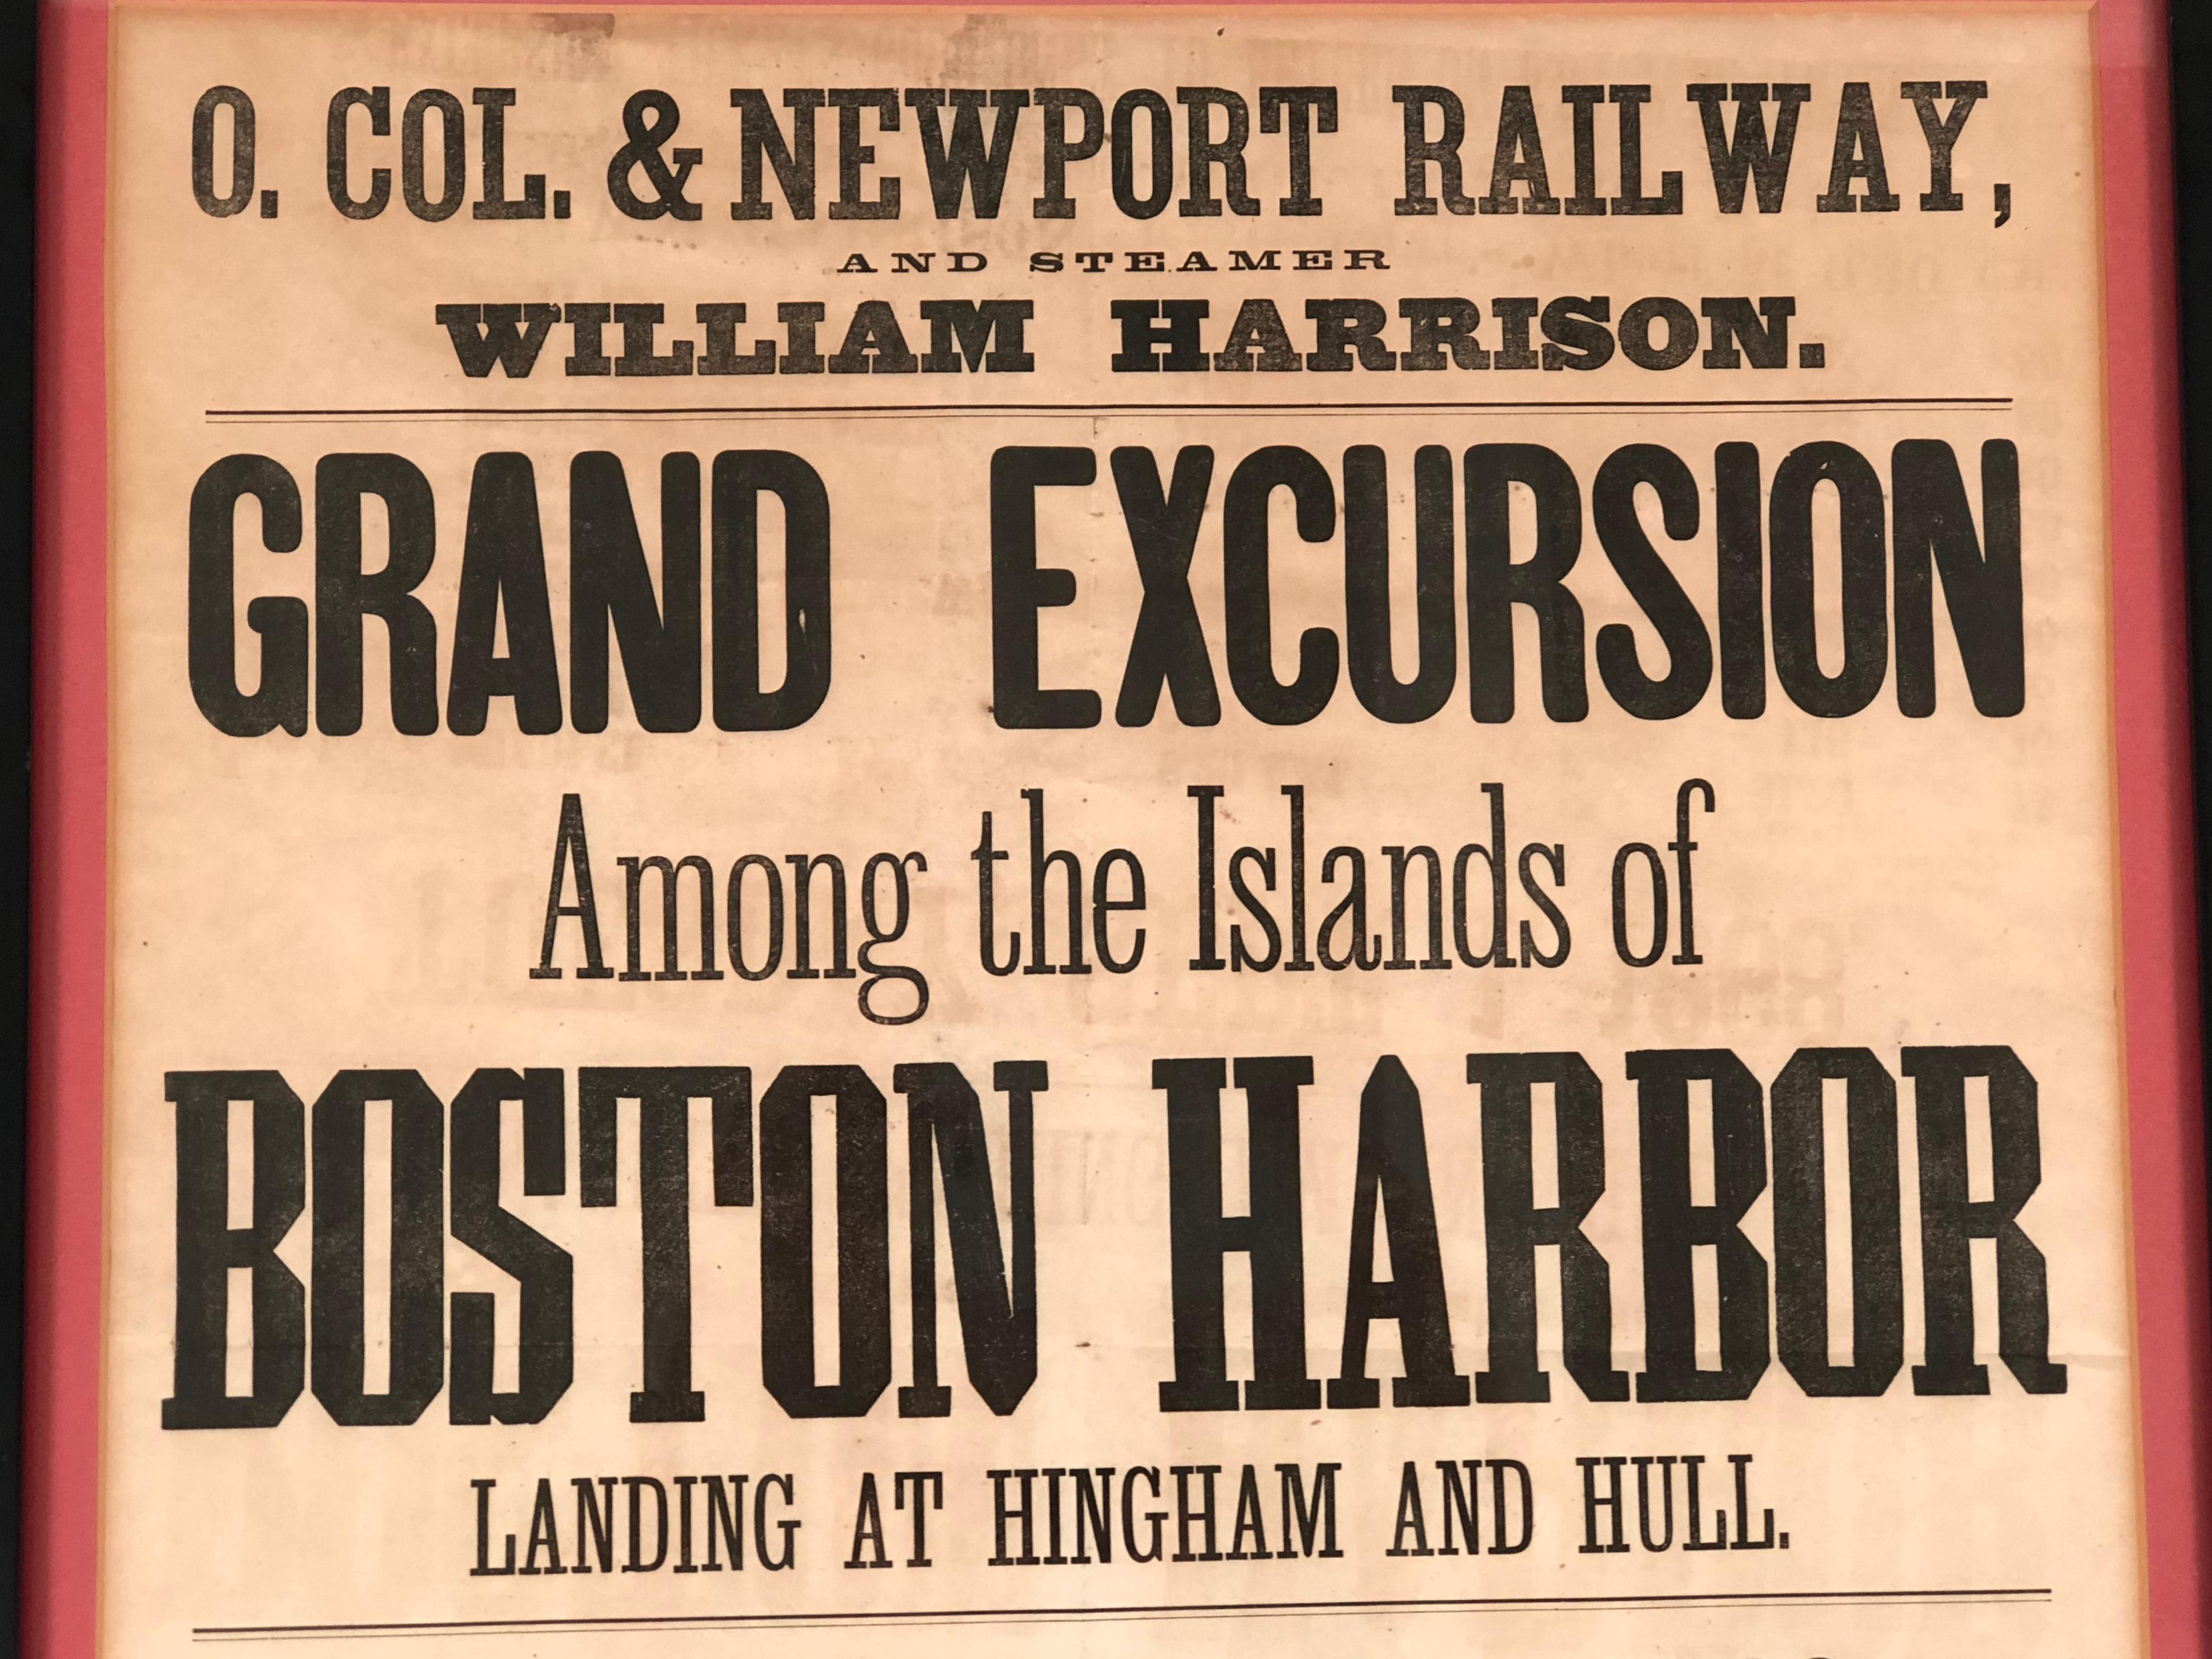 A printed broadside advertising a grand excursion among the Islands of Boston Harbor landing at Hingham and Hull on Tuesday, September 1, 1868 offered by the Old Colony and Newport Railway and the steamship William Harrison, with a schedule of train